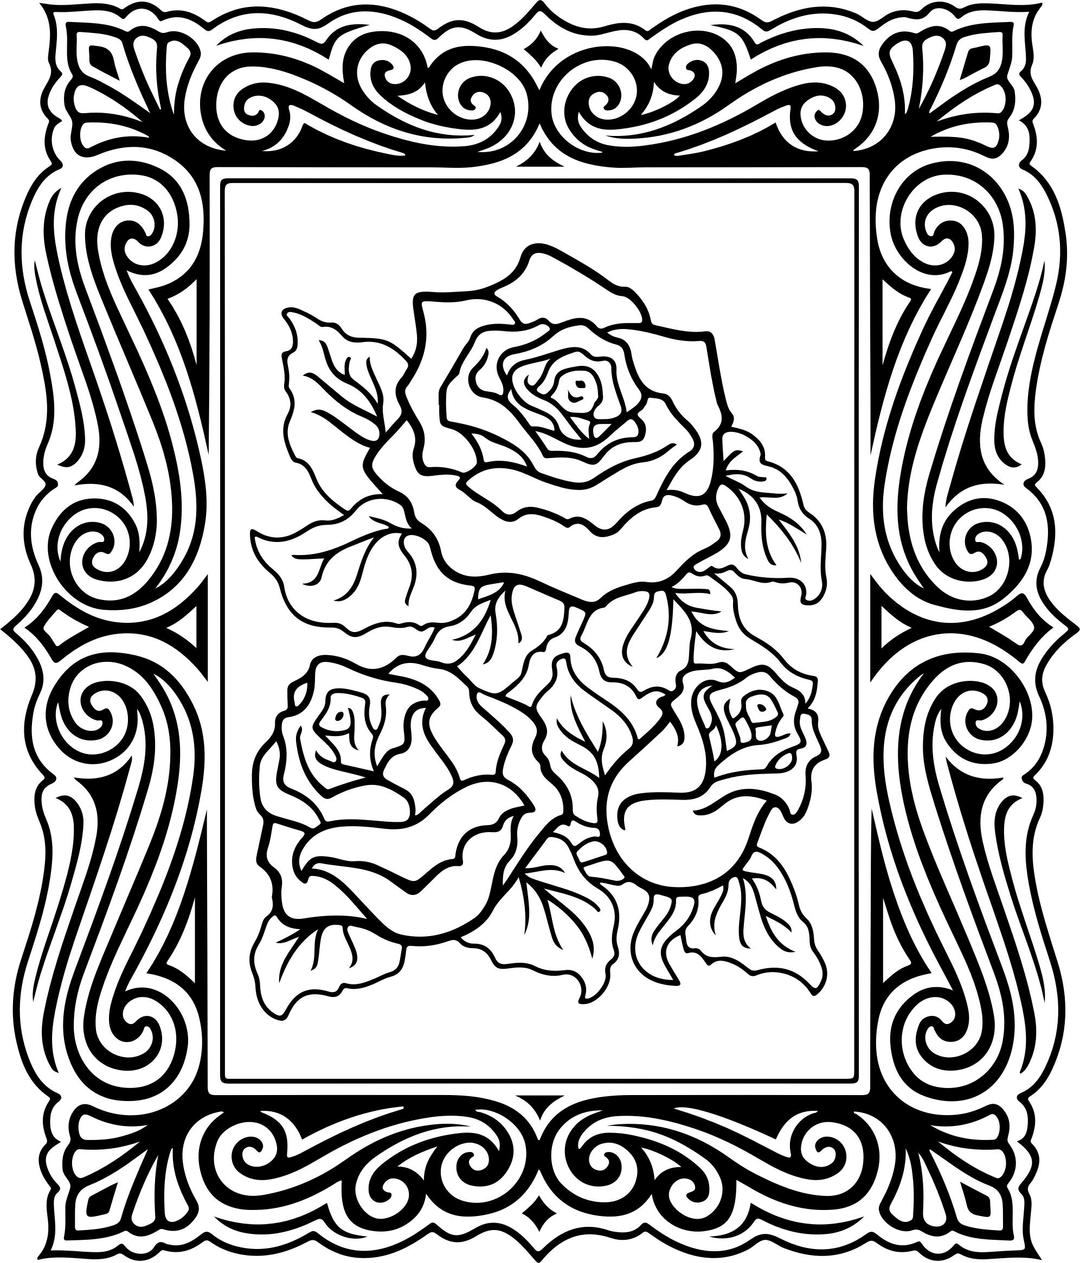 Roses With Decorative Border png transparent